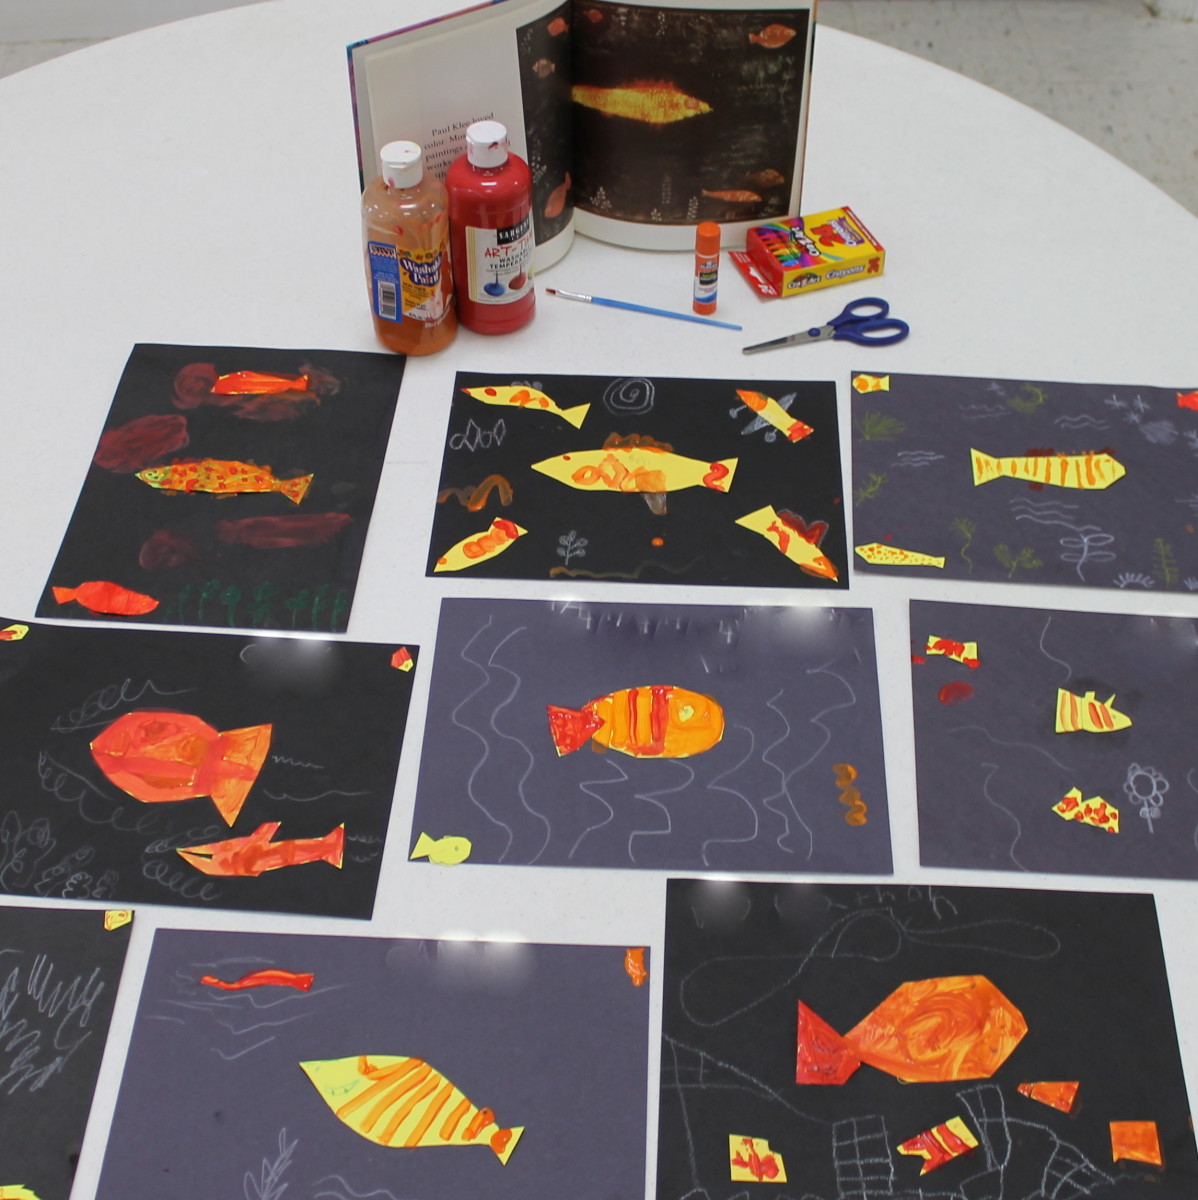 Some of the goldfish paintings inspired by Paul Klee